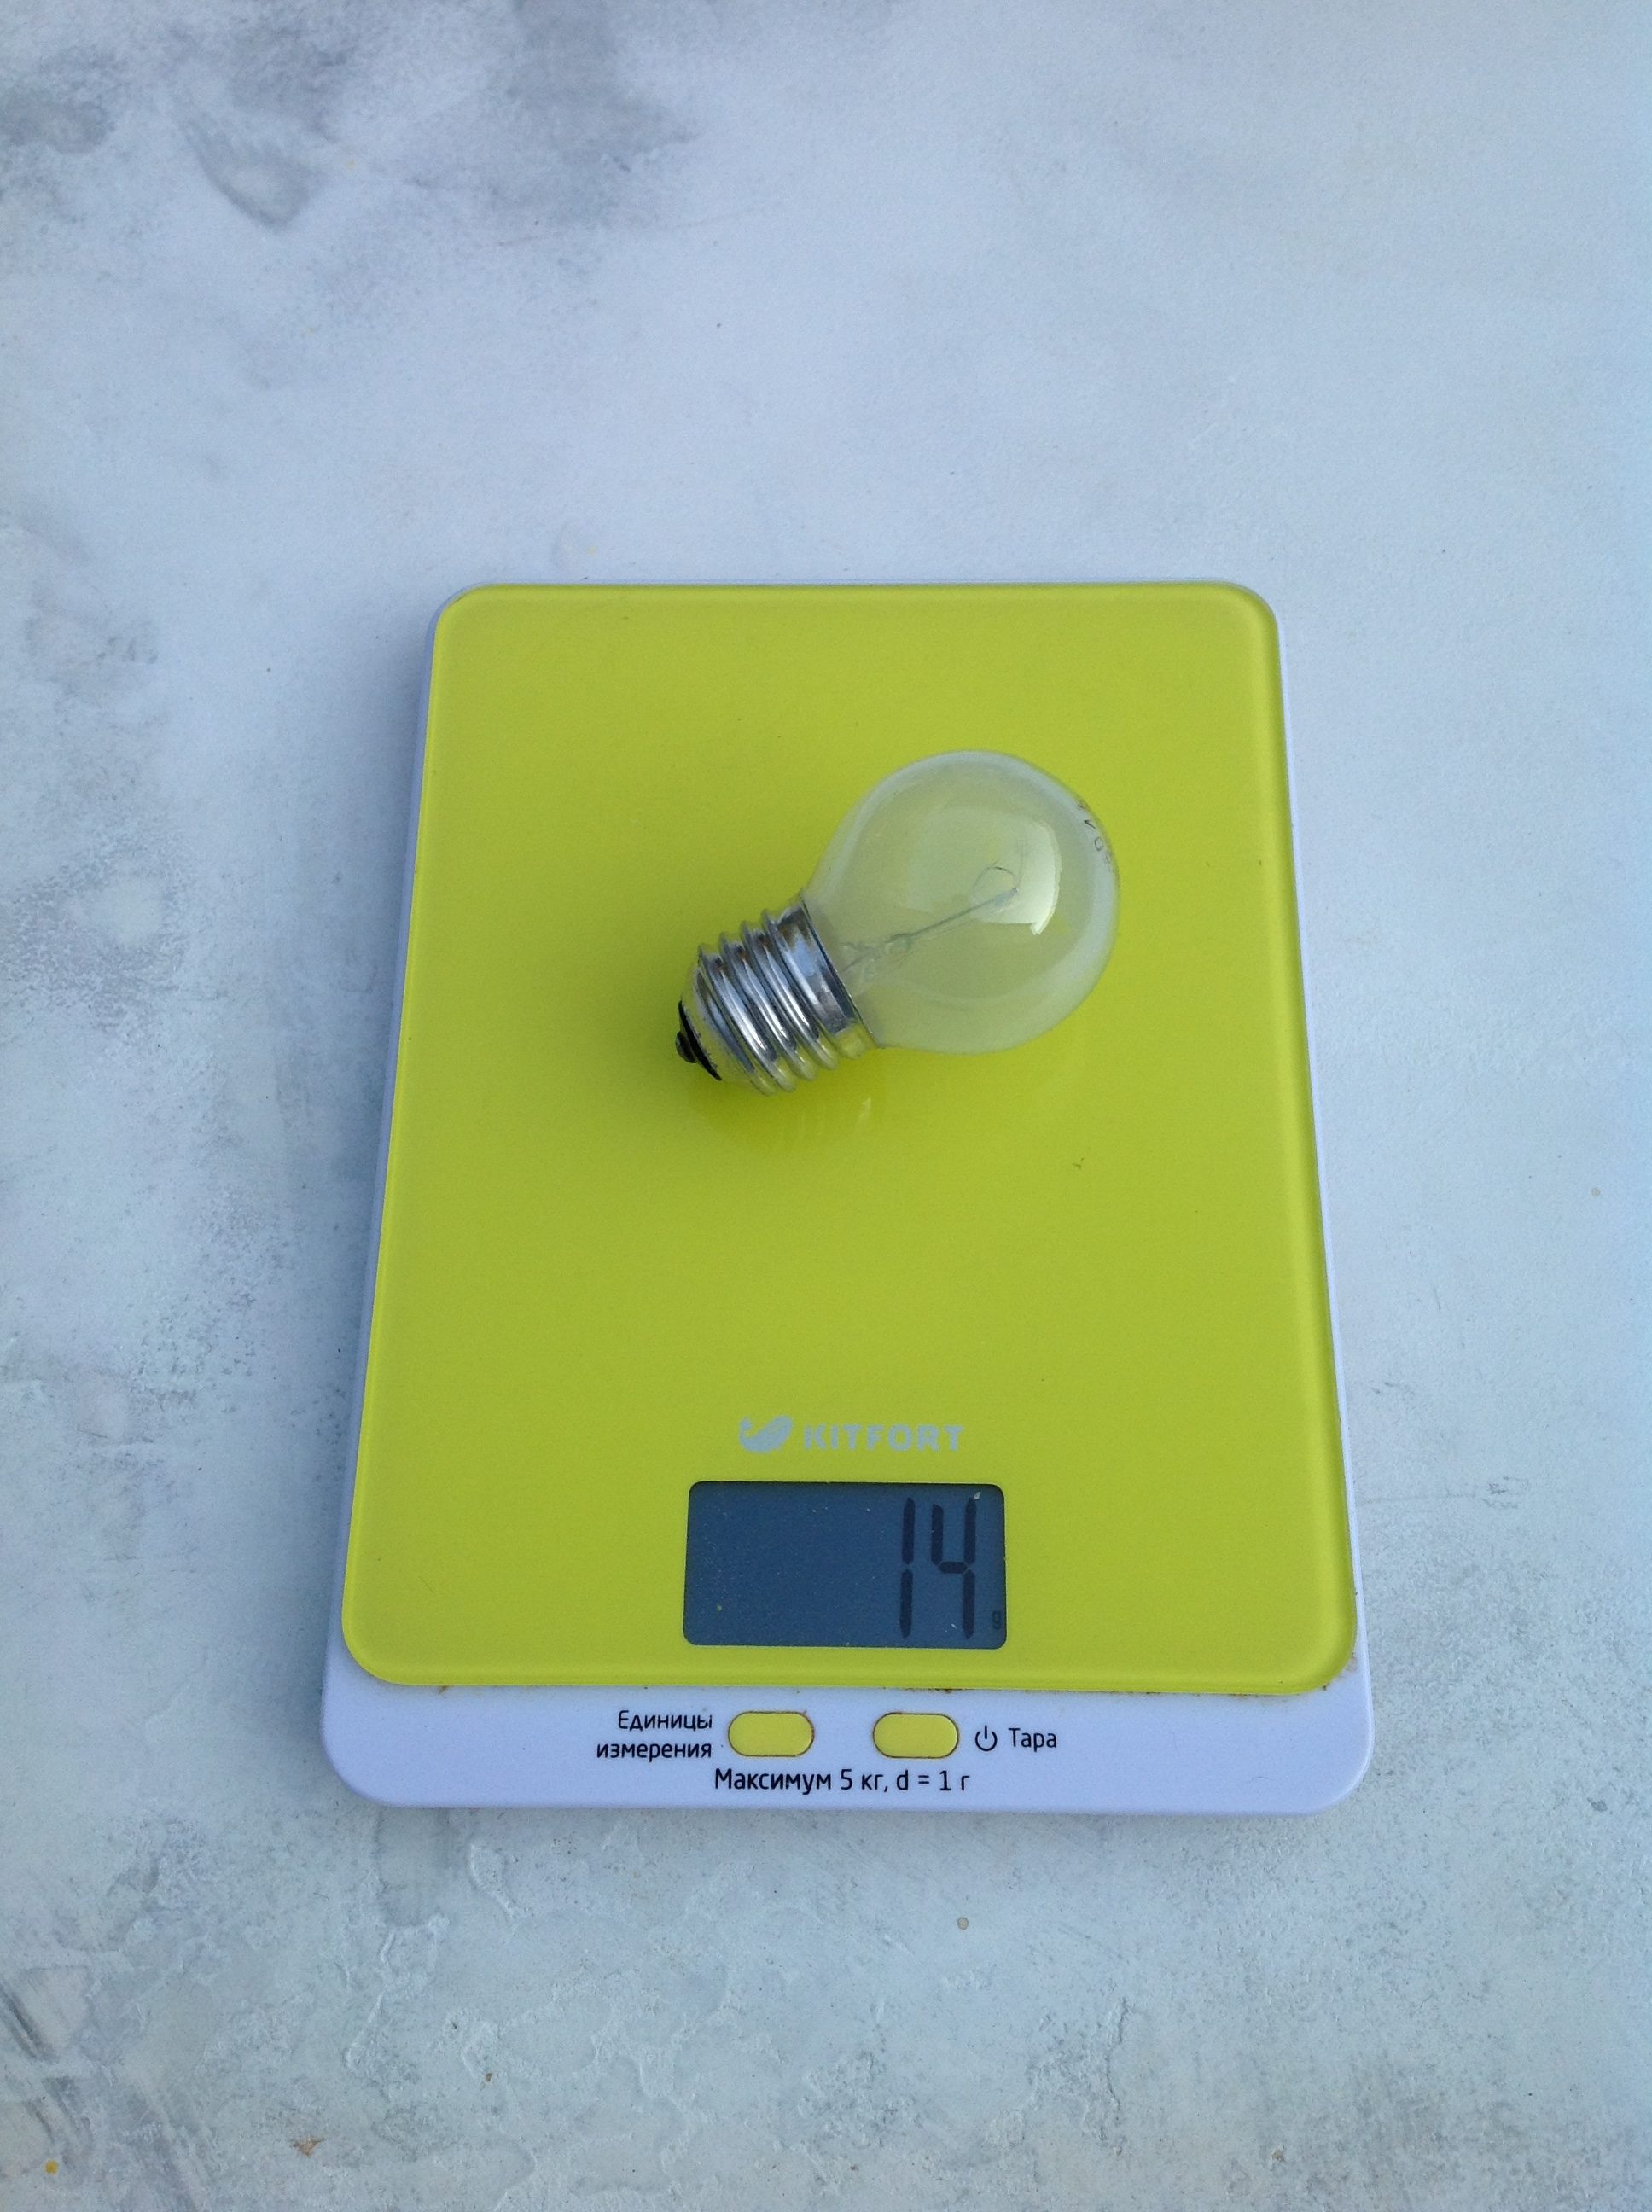 How much does a small matte incandescent lamp weigh?